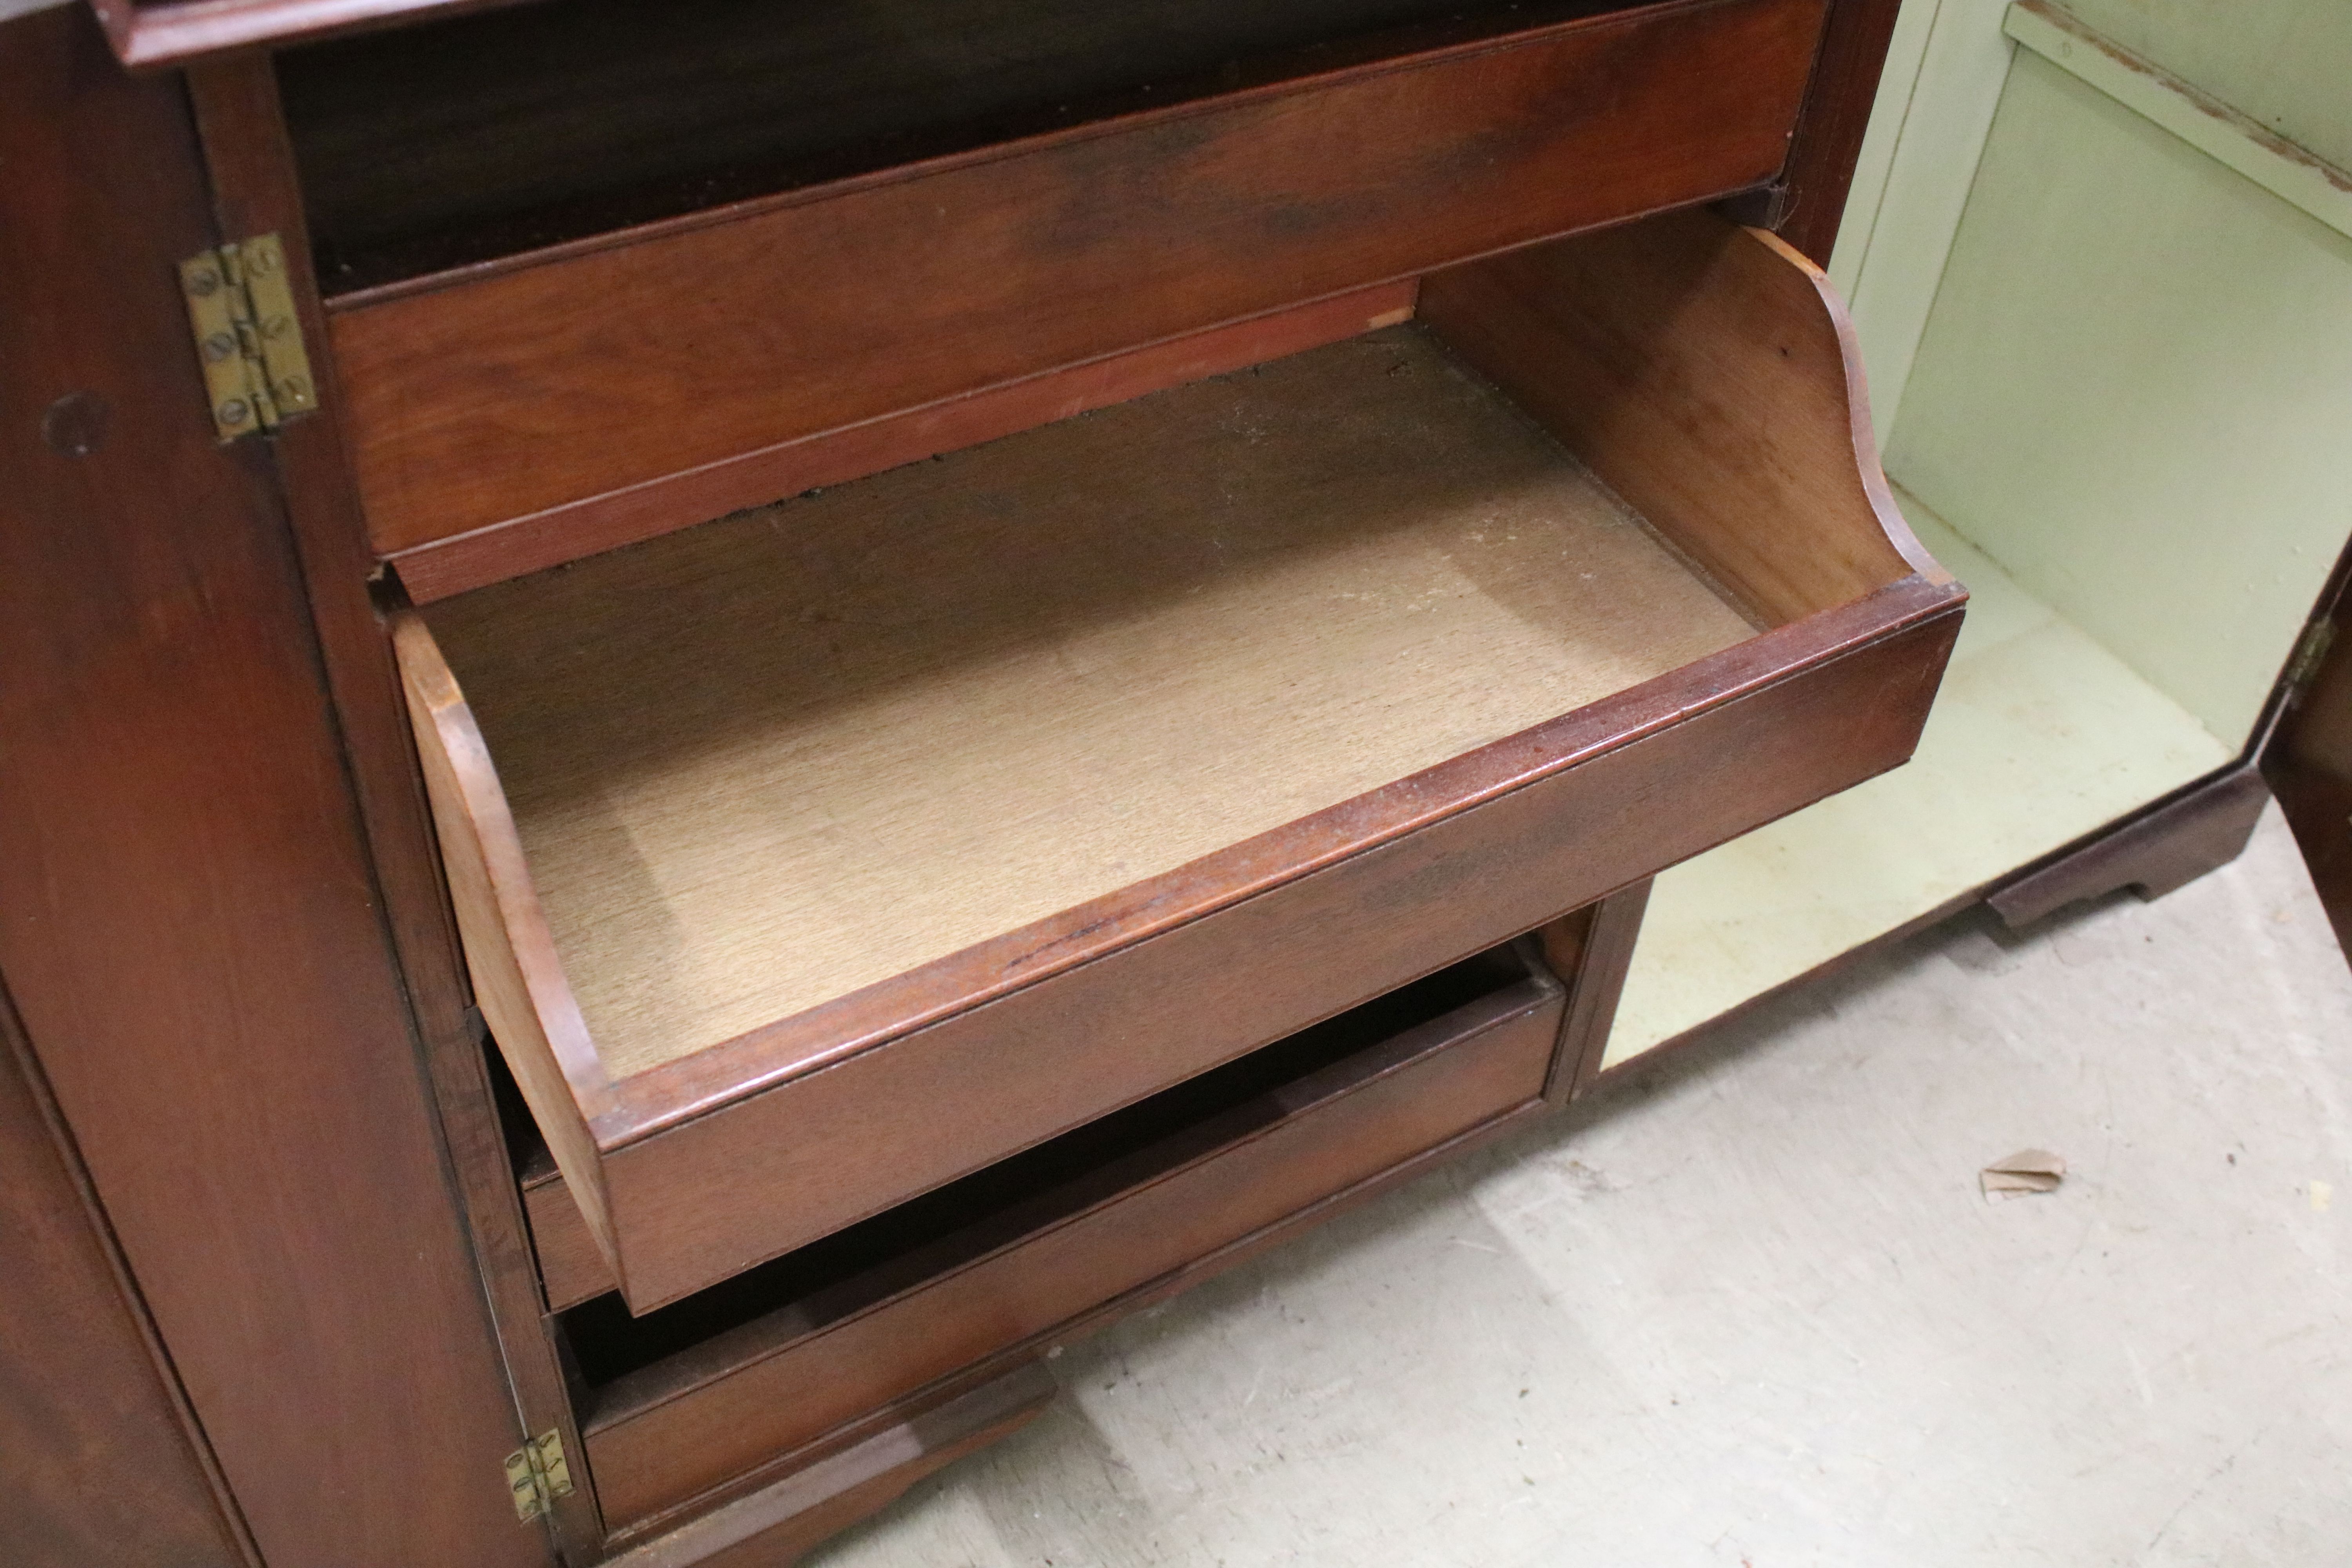 Early 20th century mahogany breakfront bookcase, the upper section with dentil moulding above - Image 10 of 12